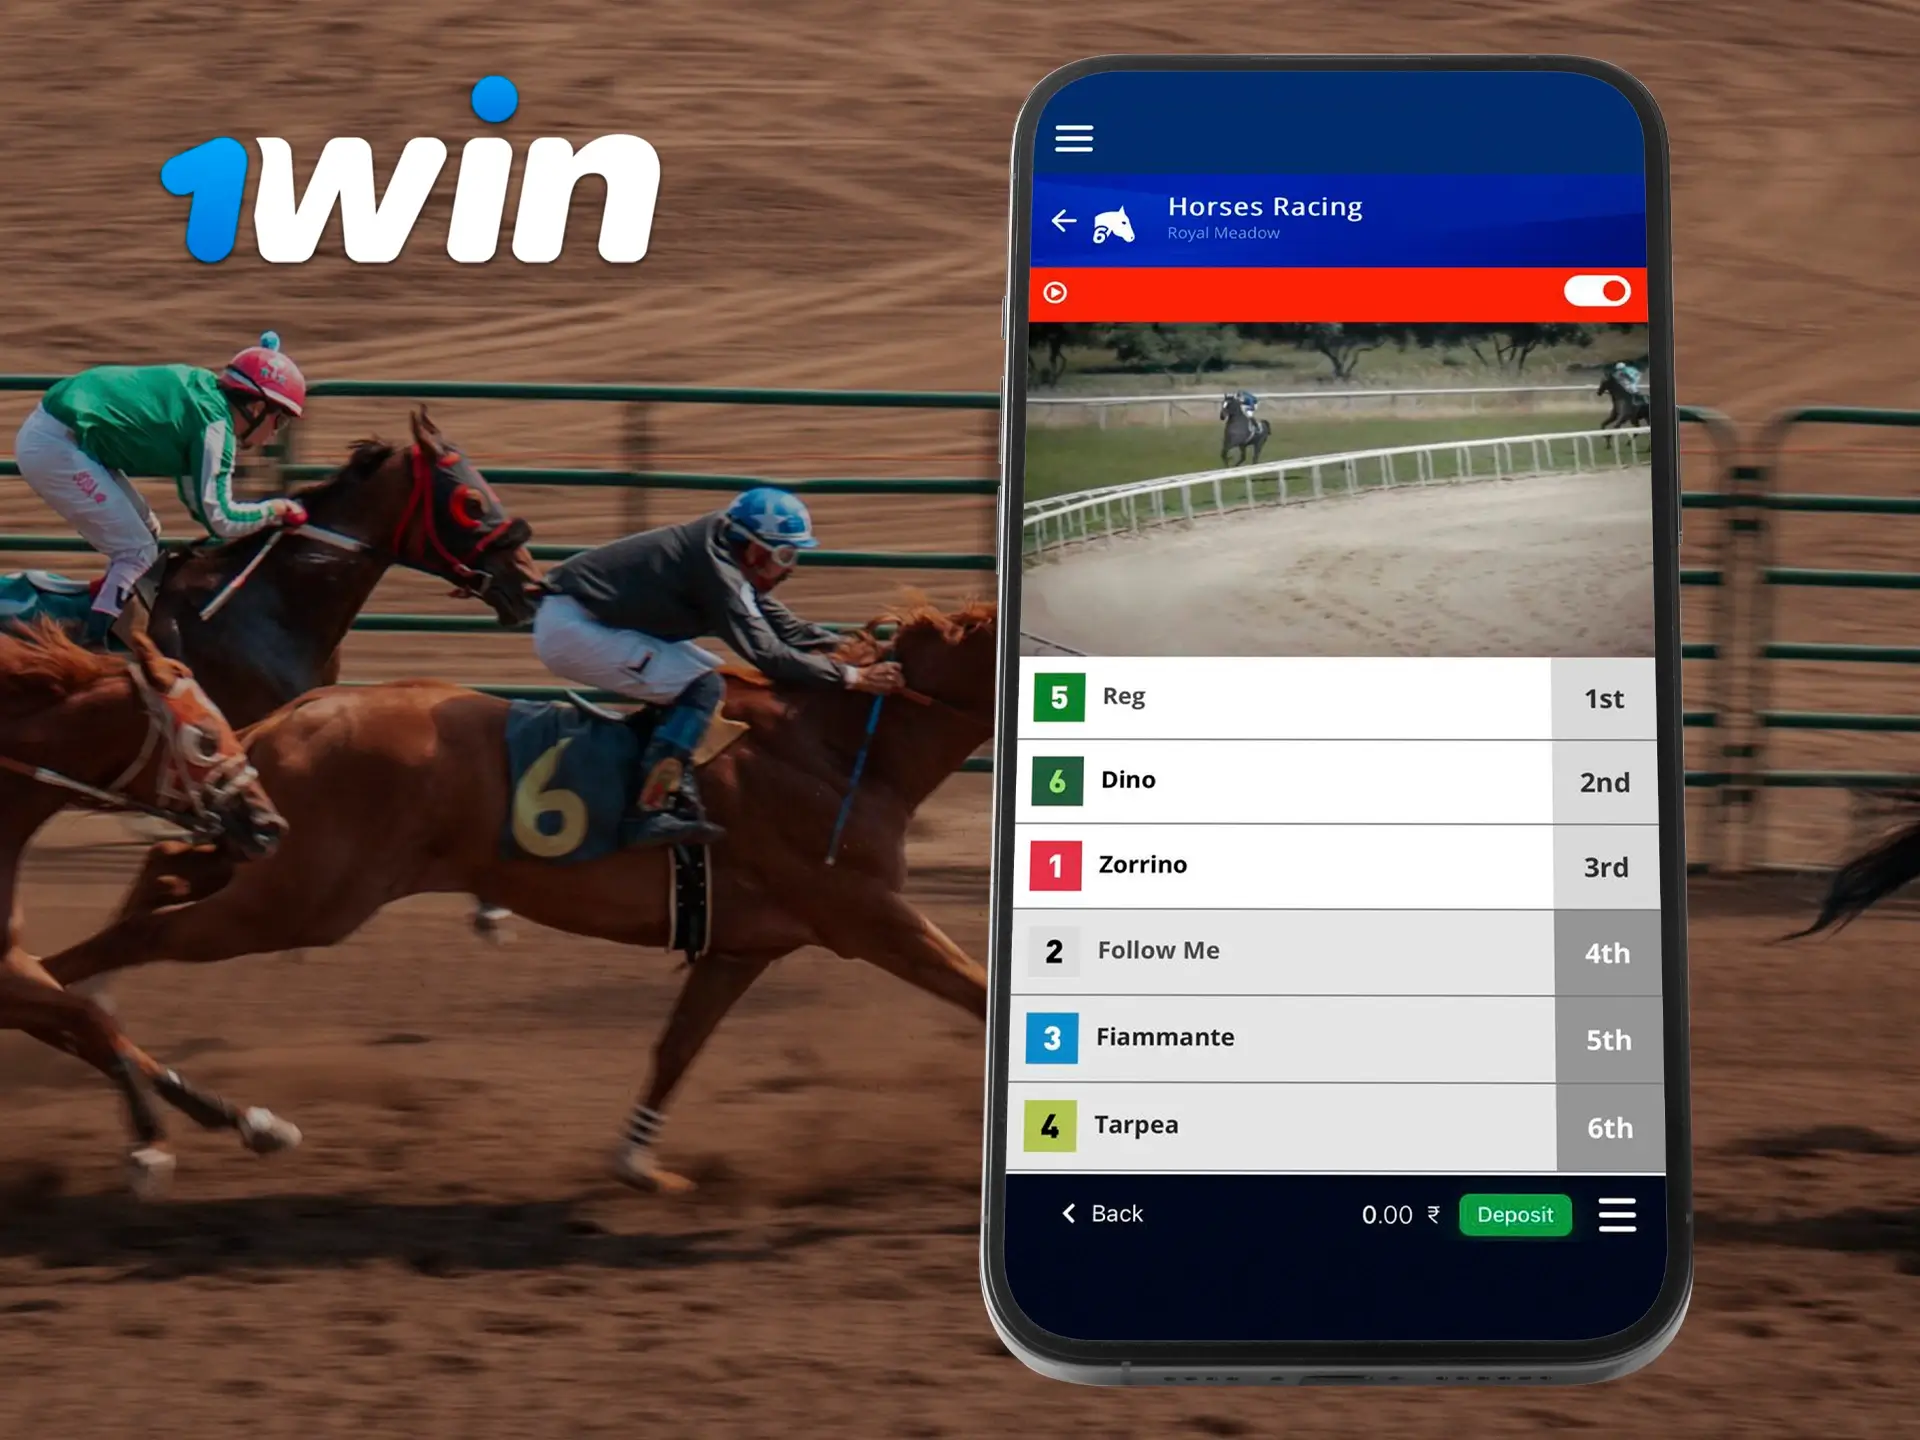 With the 1Win app, you can enjoy superb graphics when watching your favourite horse races.